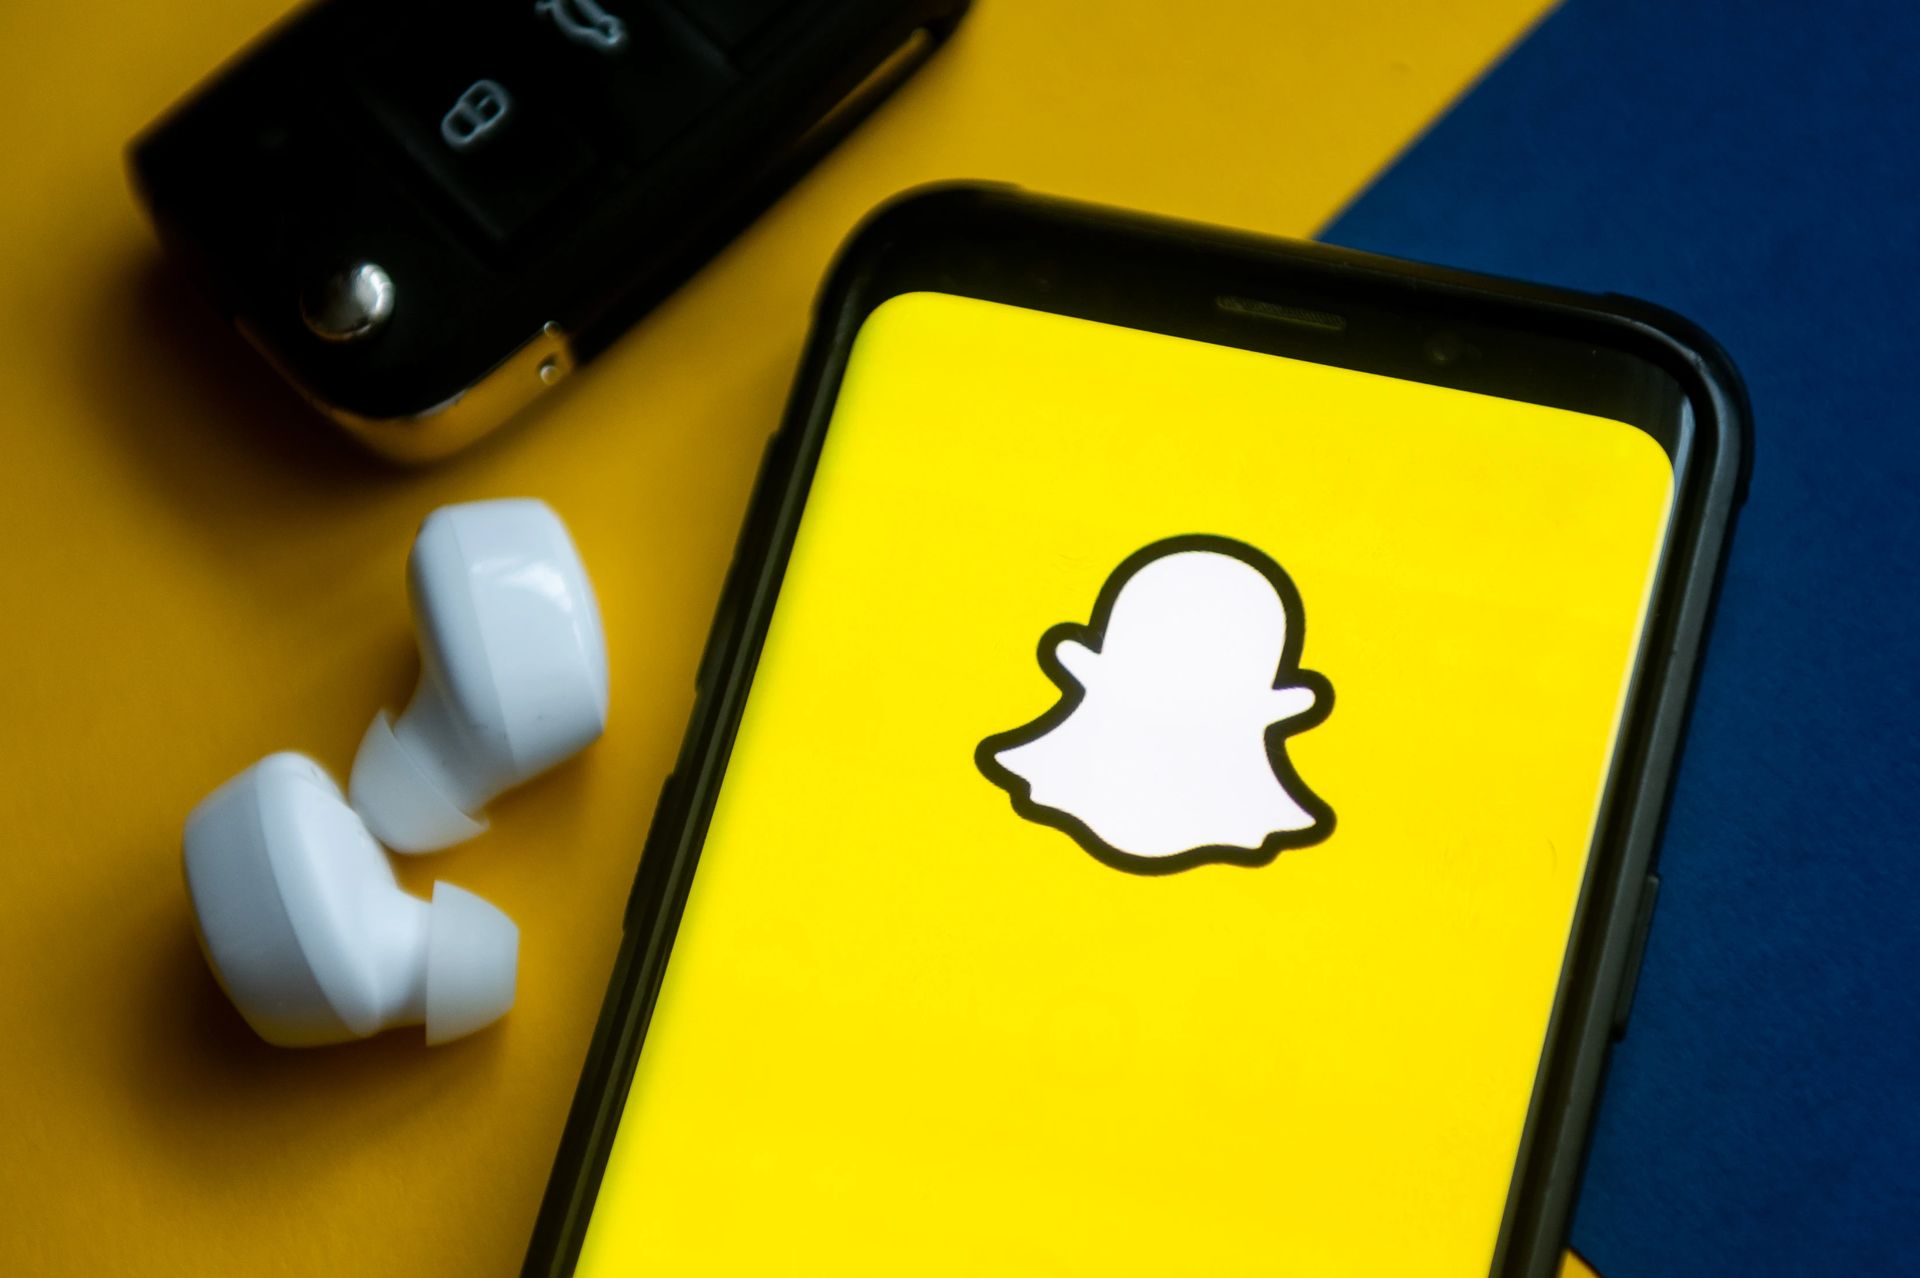 In this article, we are going to be covering Snapchat not working: How to fix Snapchat snaps not sending, so you can snap as much you like without any issues.